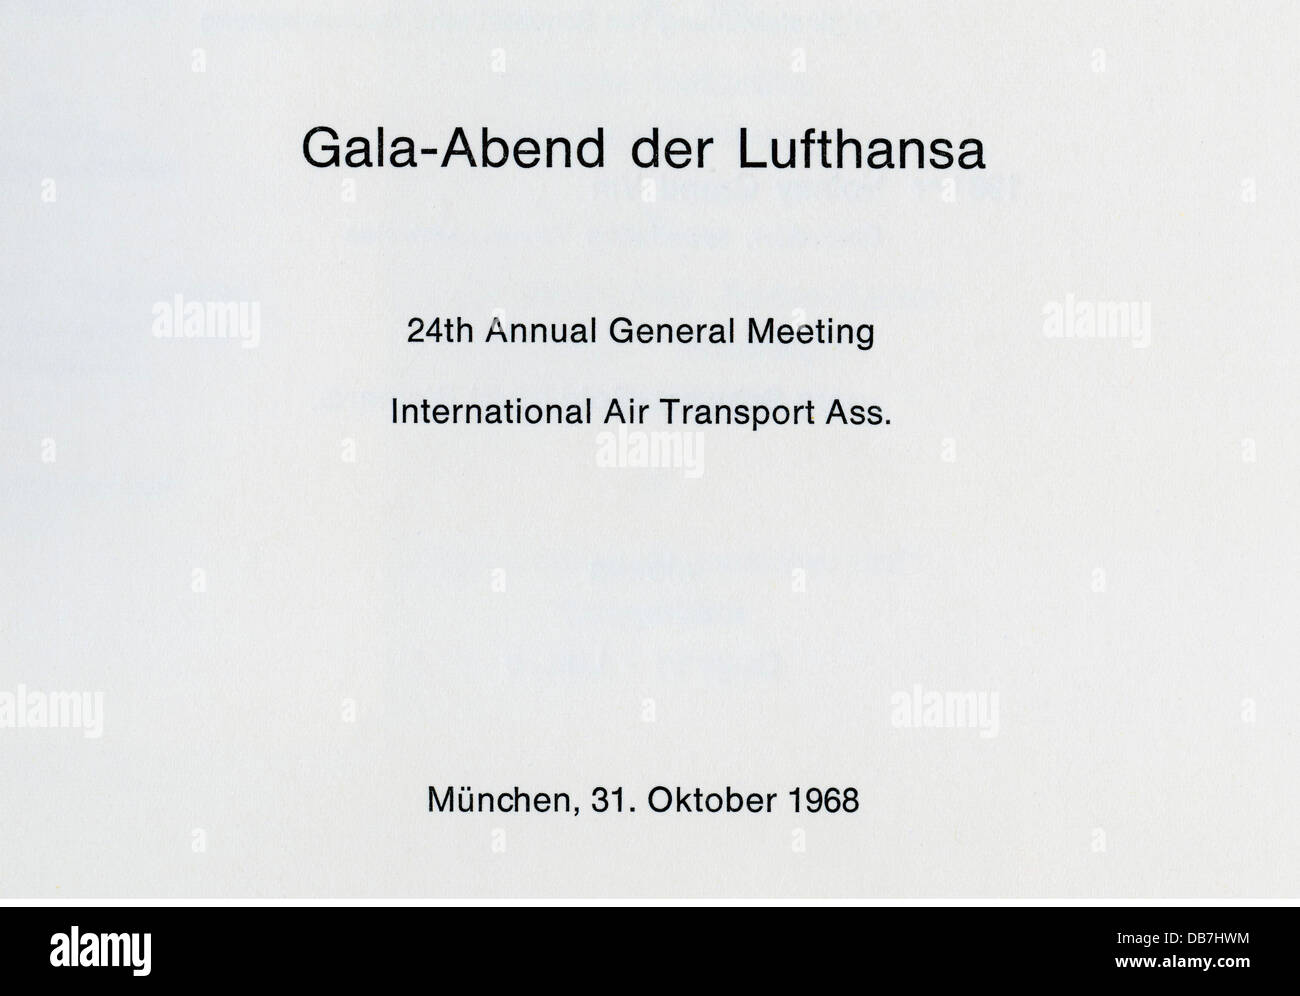 gastronomy, menu, gala evening of the Lufthansa, on the occasion of of the 24th annual general meeting of the IATA, cover sheet, hotel 'Bayerischer Hof', Munich, 31.10.1968, Additional-Rights-Clearences-Not Available Stock Photo